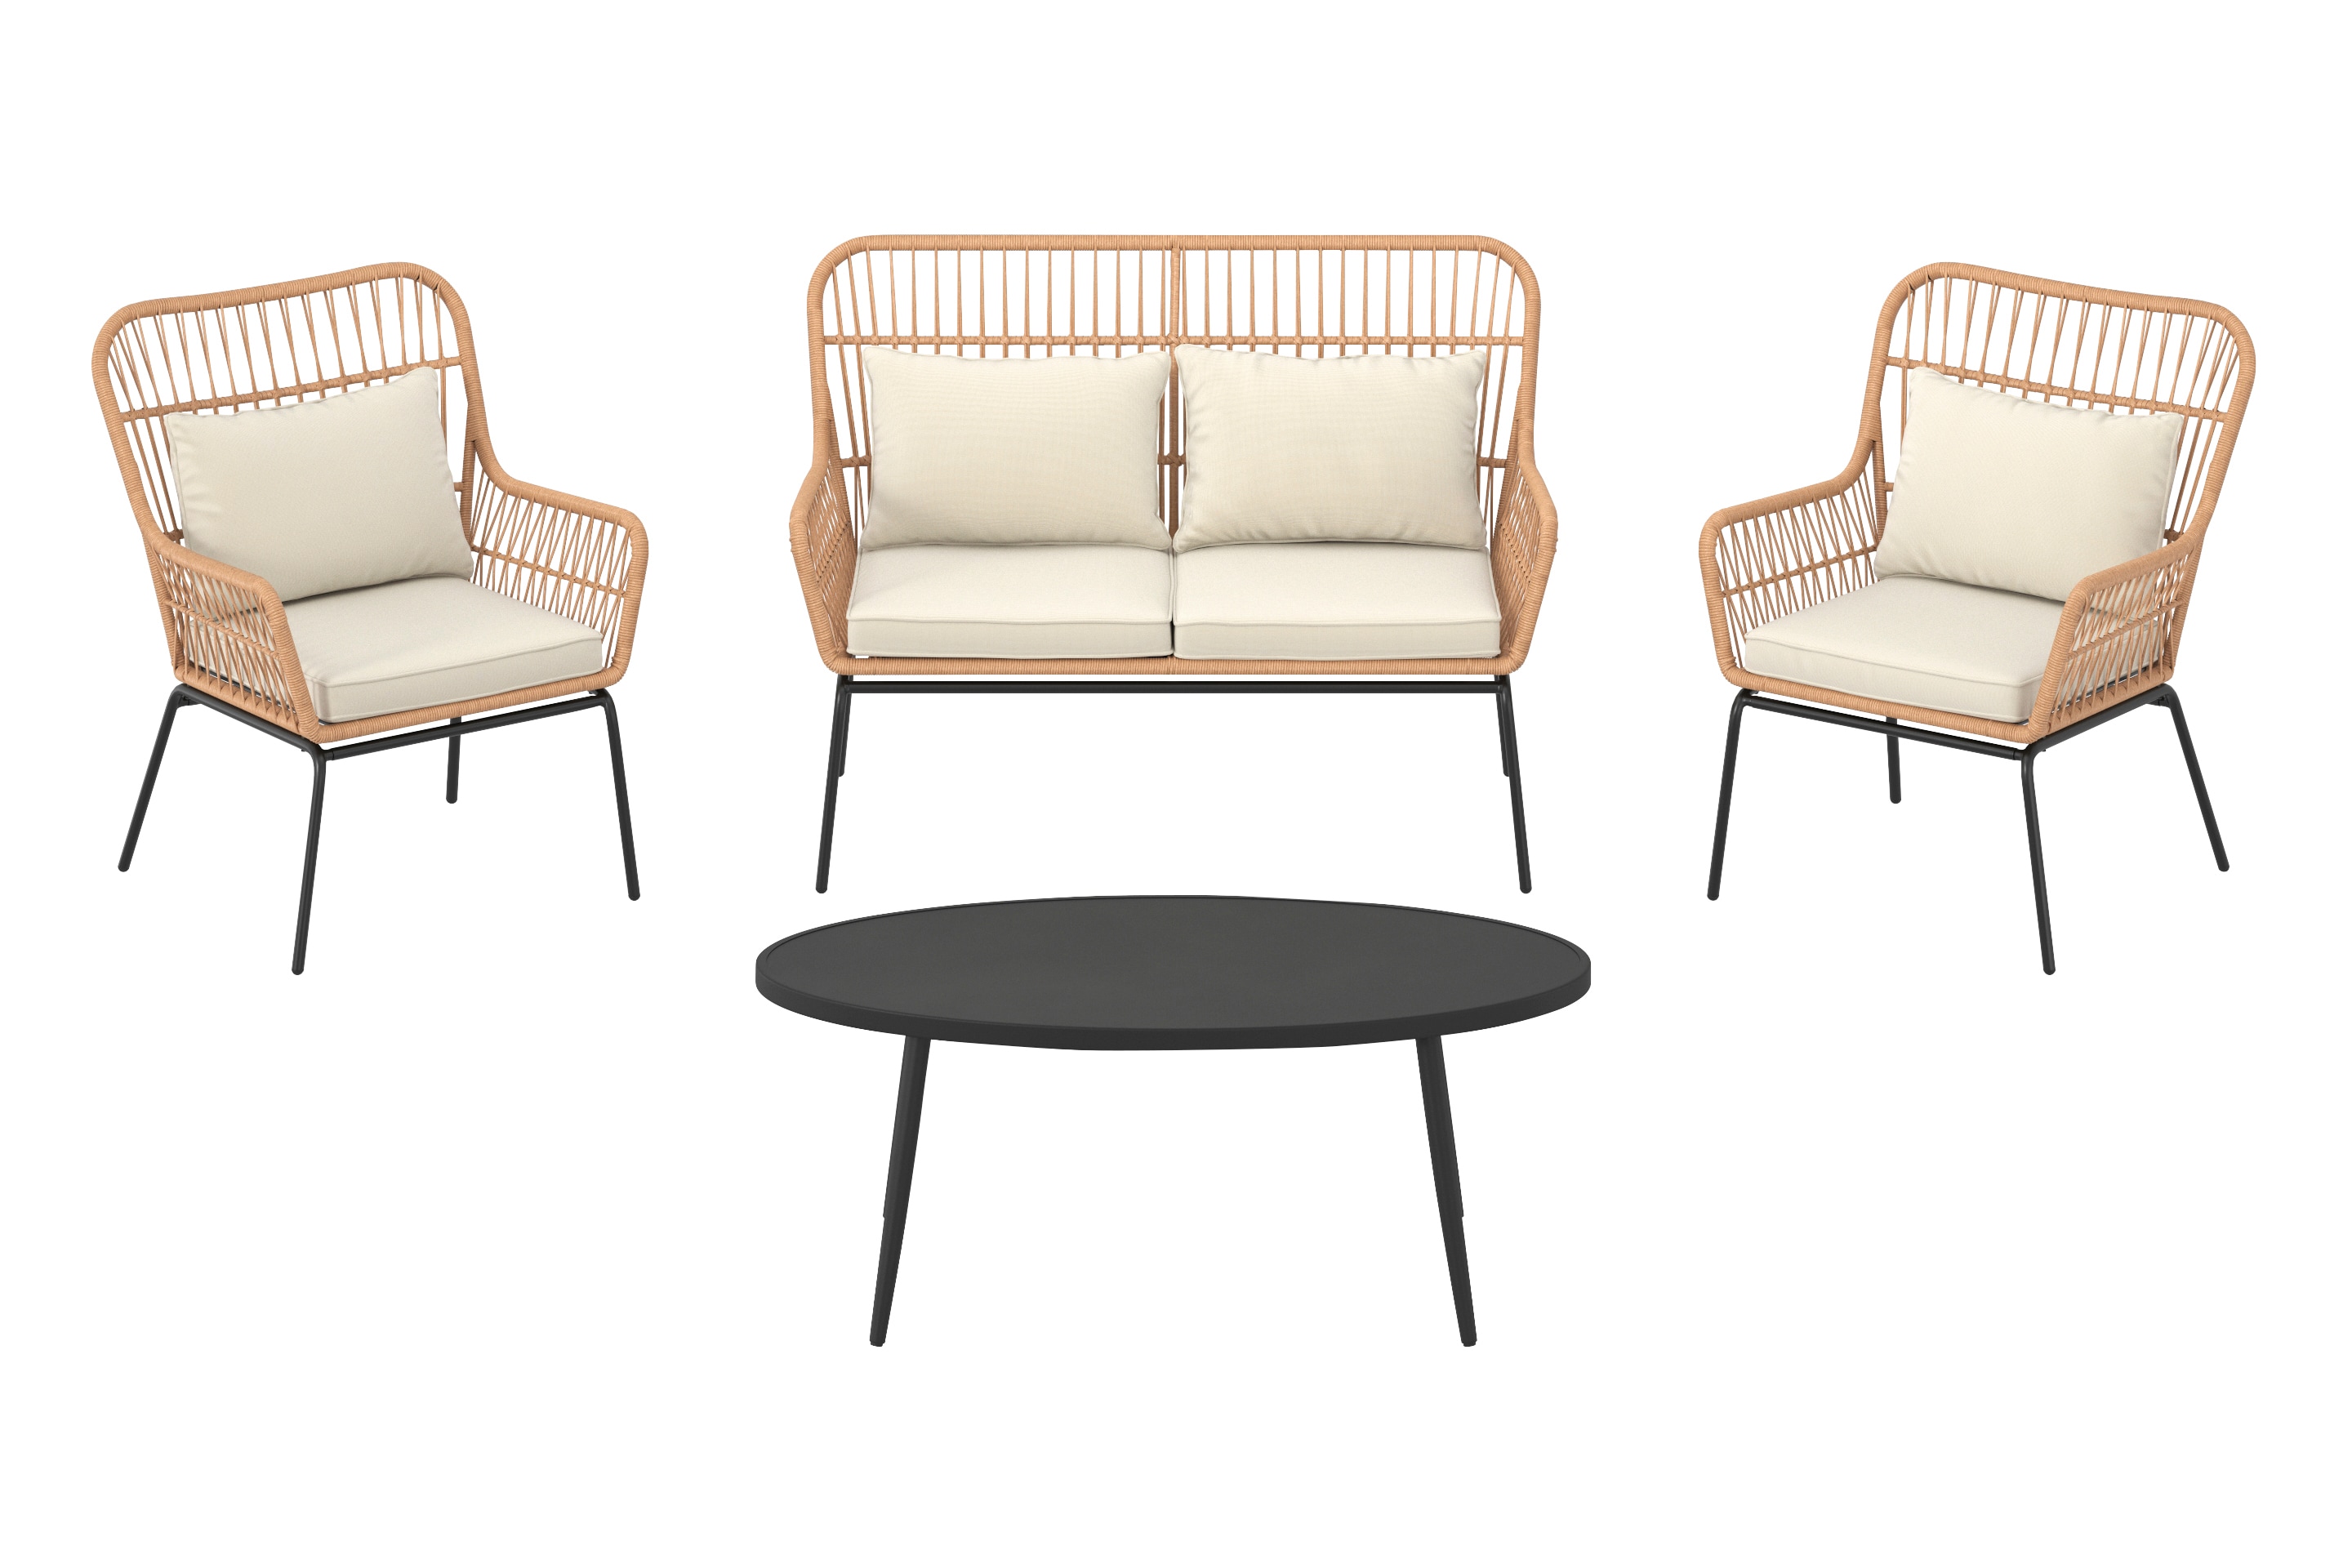 department 21 Conversation at with Origin Patio 4-Piece Sets Brynlee Off-white in Cushions Patio Set Conversation the Wicker